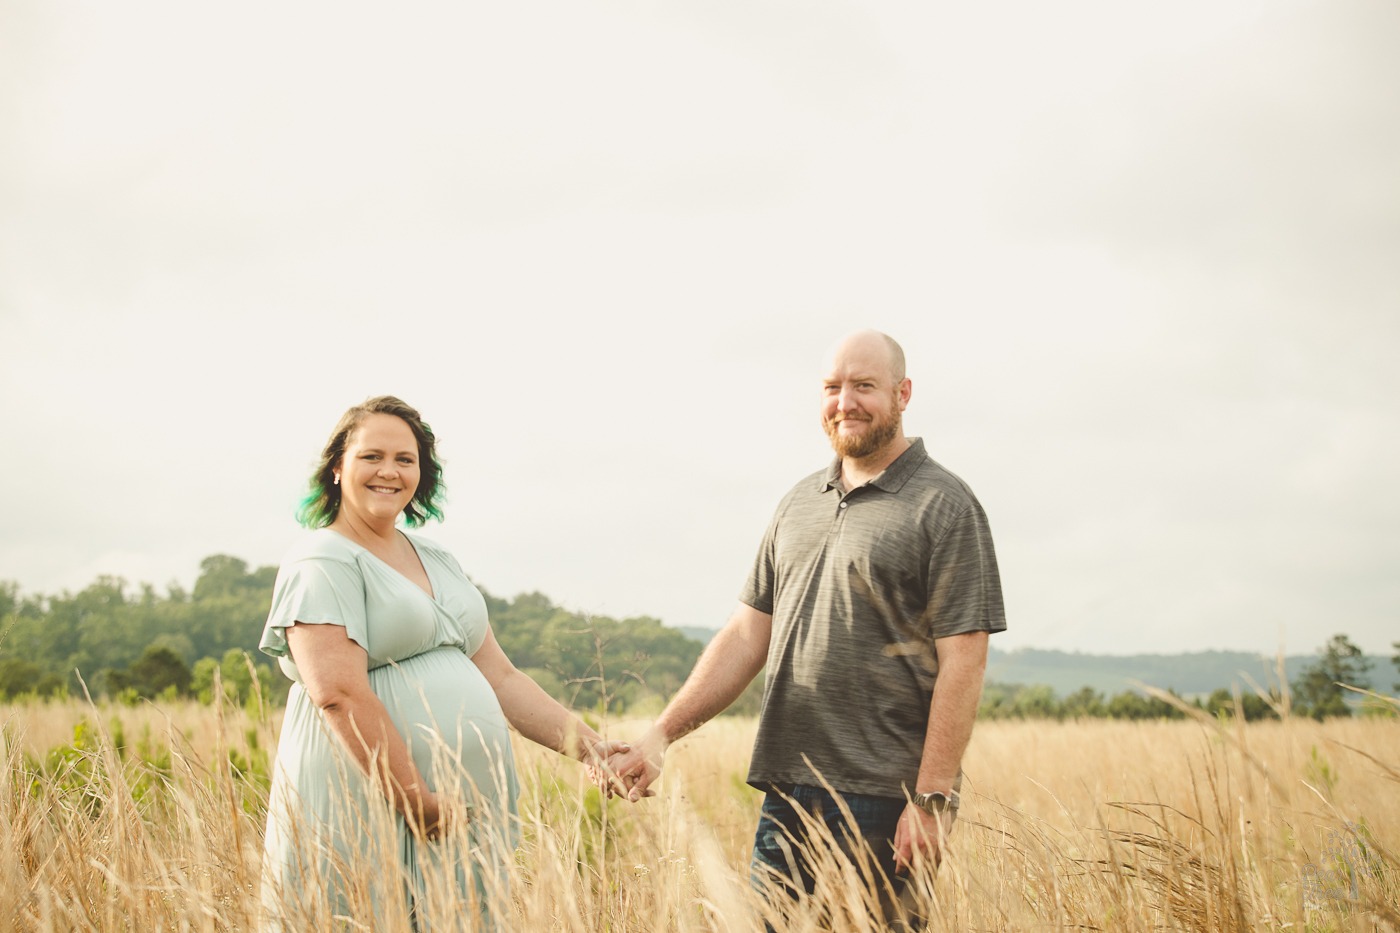 Expecting parents standing in a field of tall grass holding hands and smiling for maternity photos